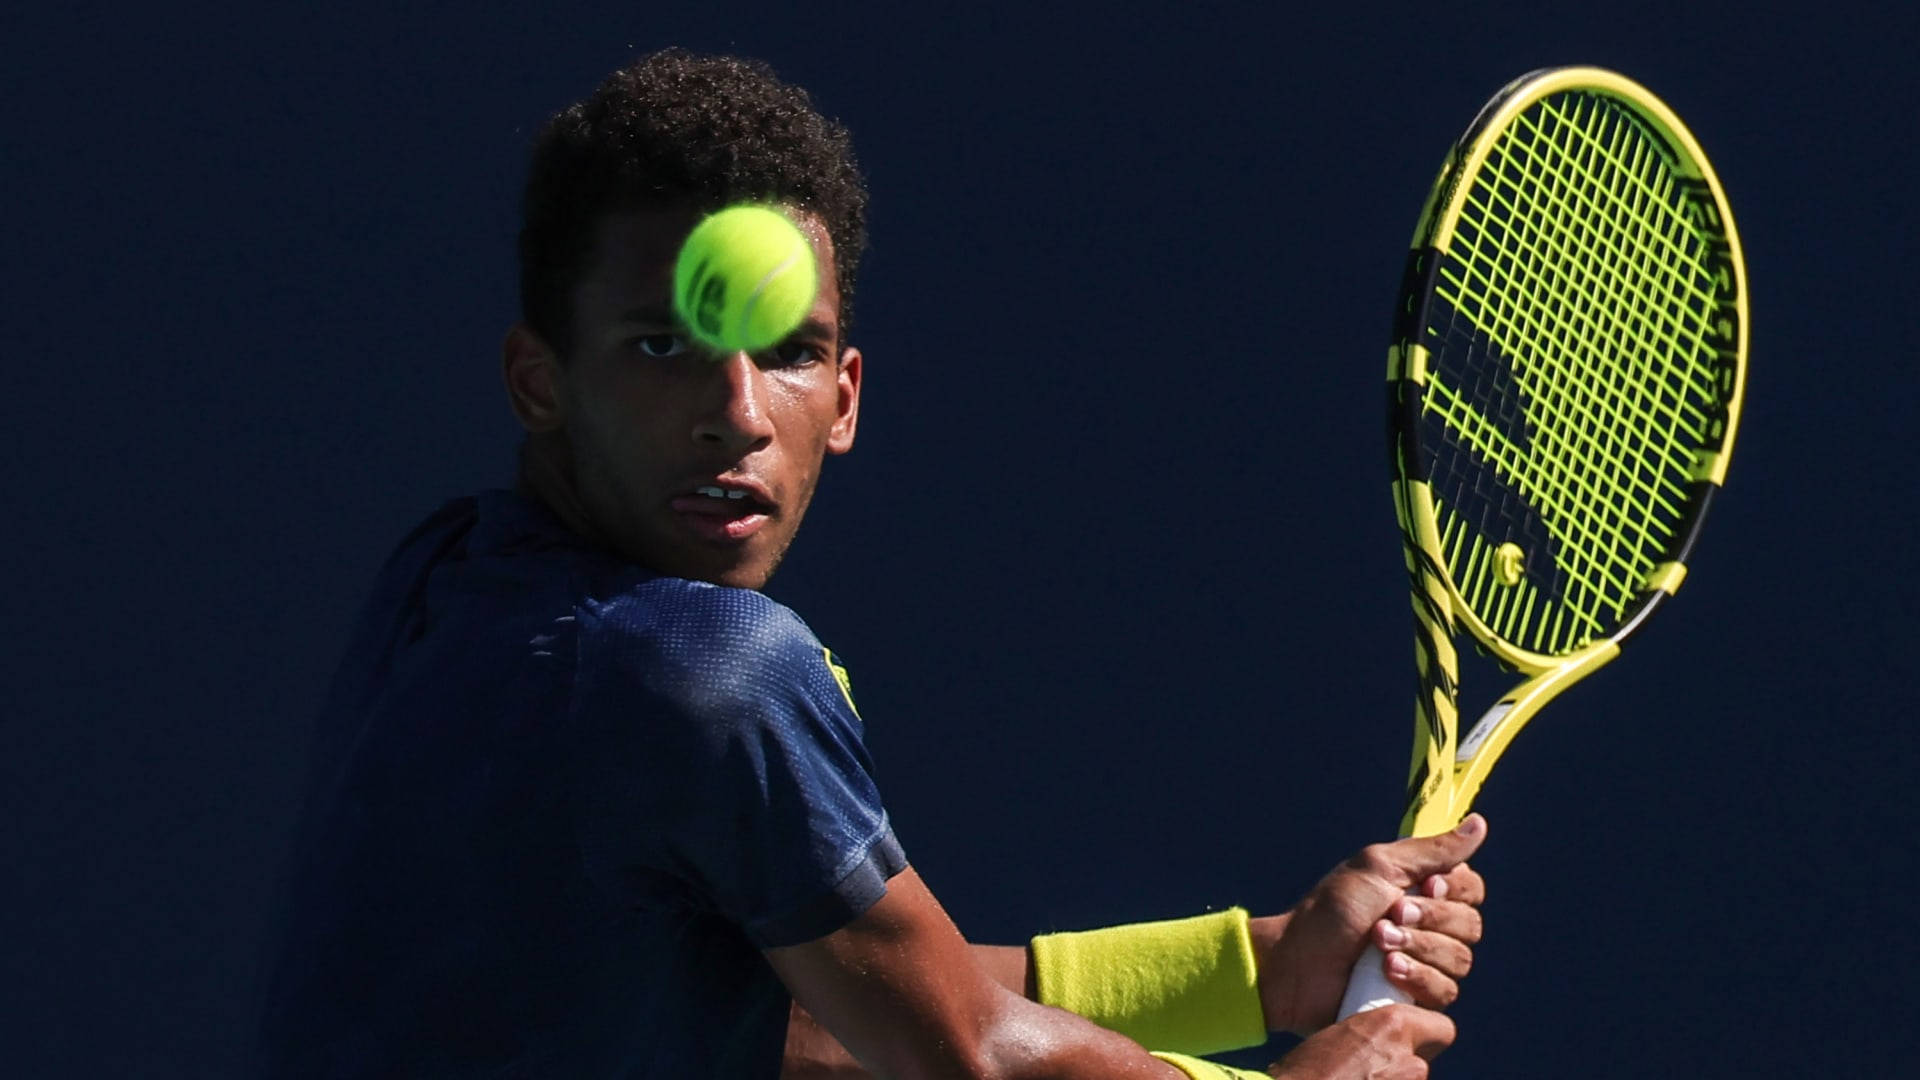 Felix Auger-aliassime Showcasing A Steady, Focused Expression During A Game. Background